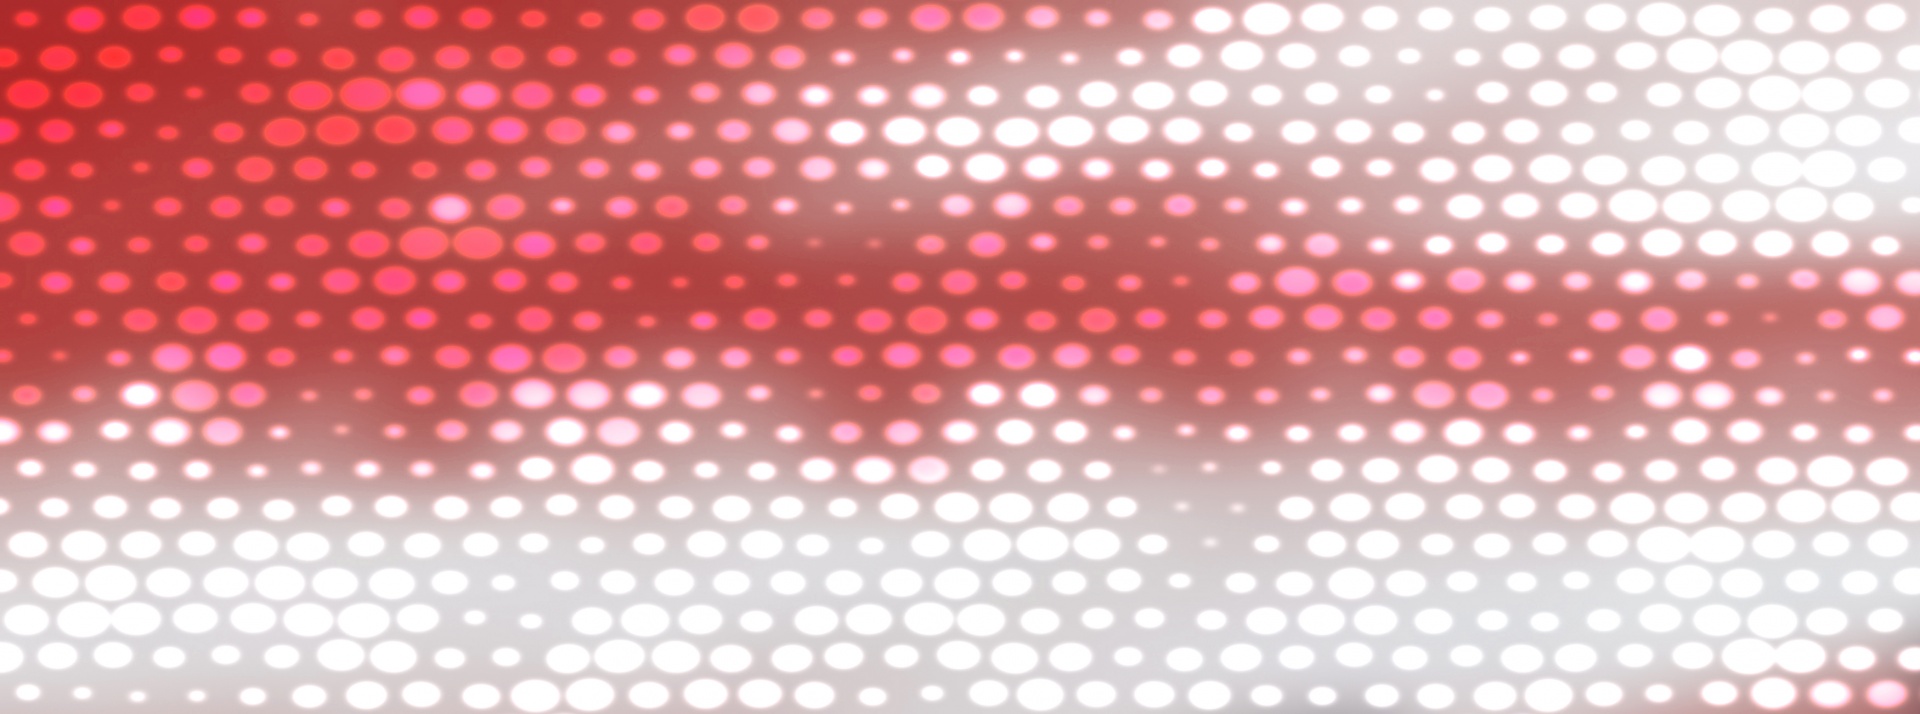 dots rectangle red free photo